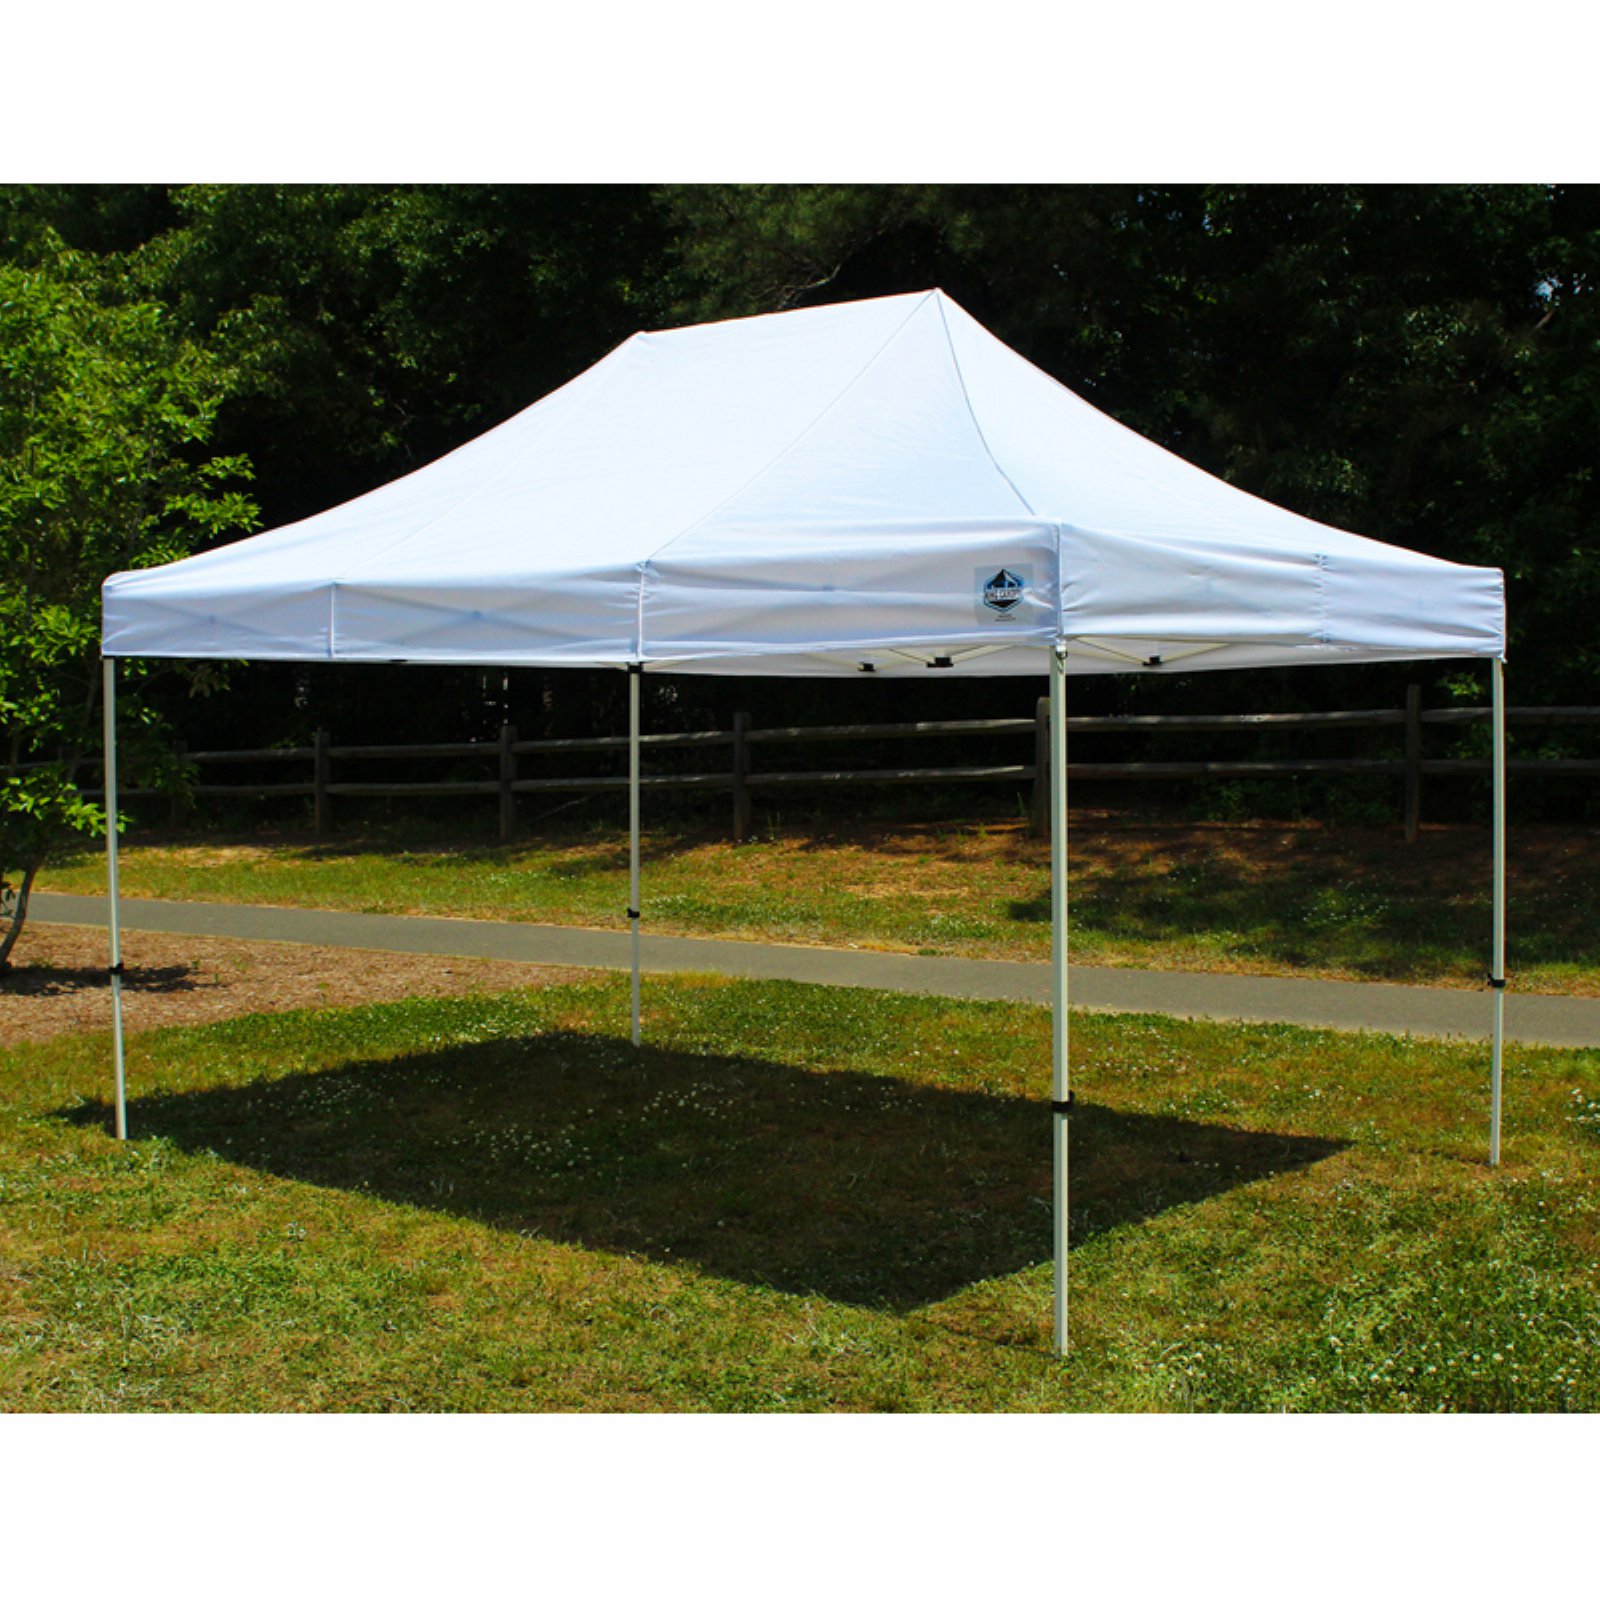 King Canopy FESTIVAL 10X15 Instant Pop Up Tent w/ WHITE Cover - image 1 of 5